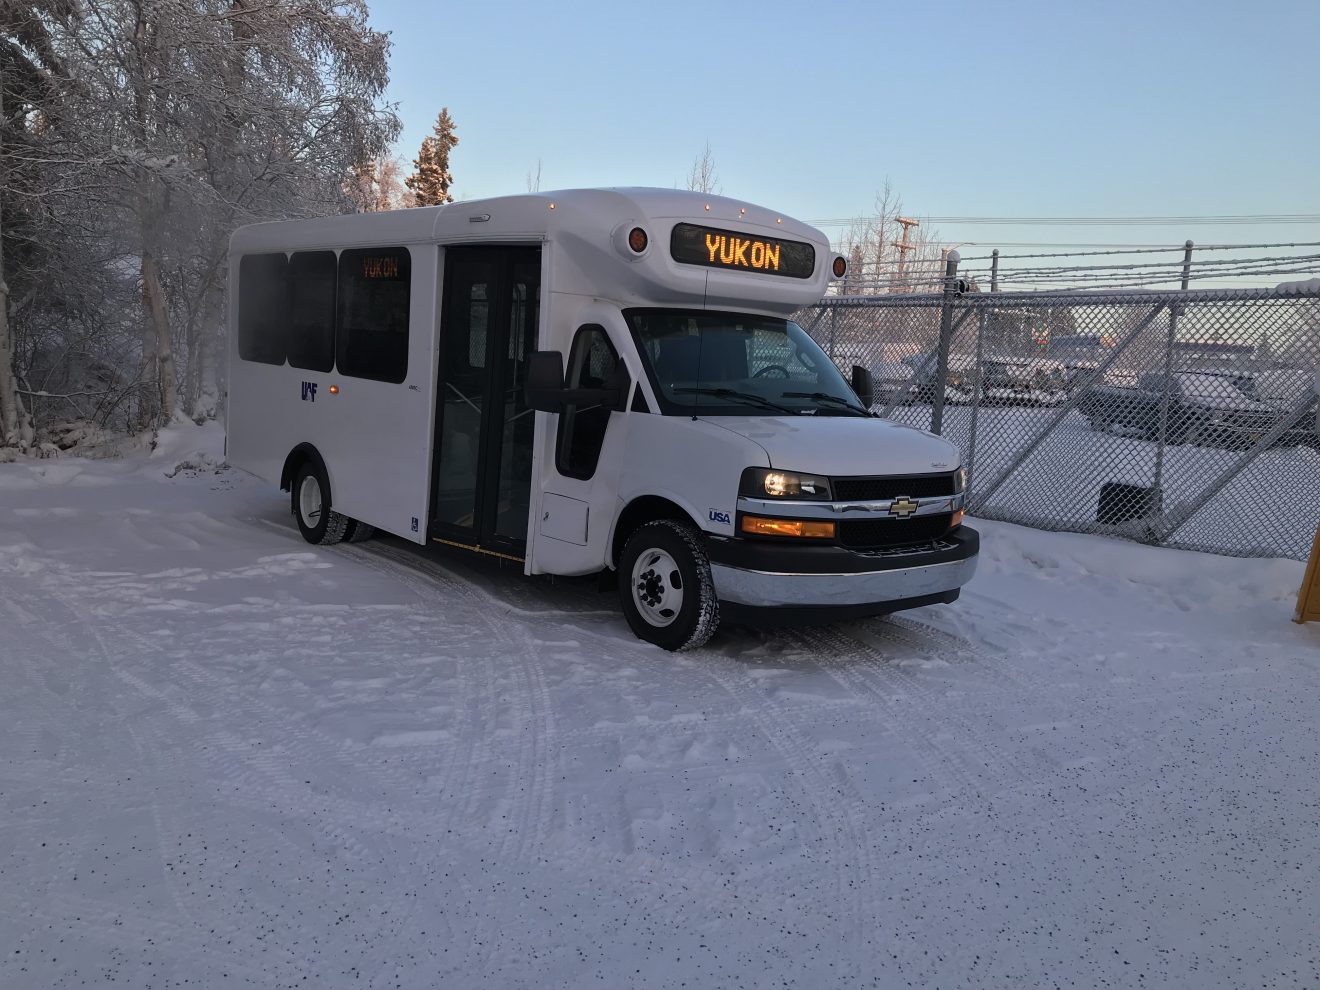 UAF's new shuttle bus, which features a ramp instead of stairs.